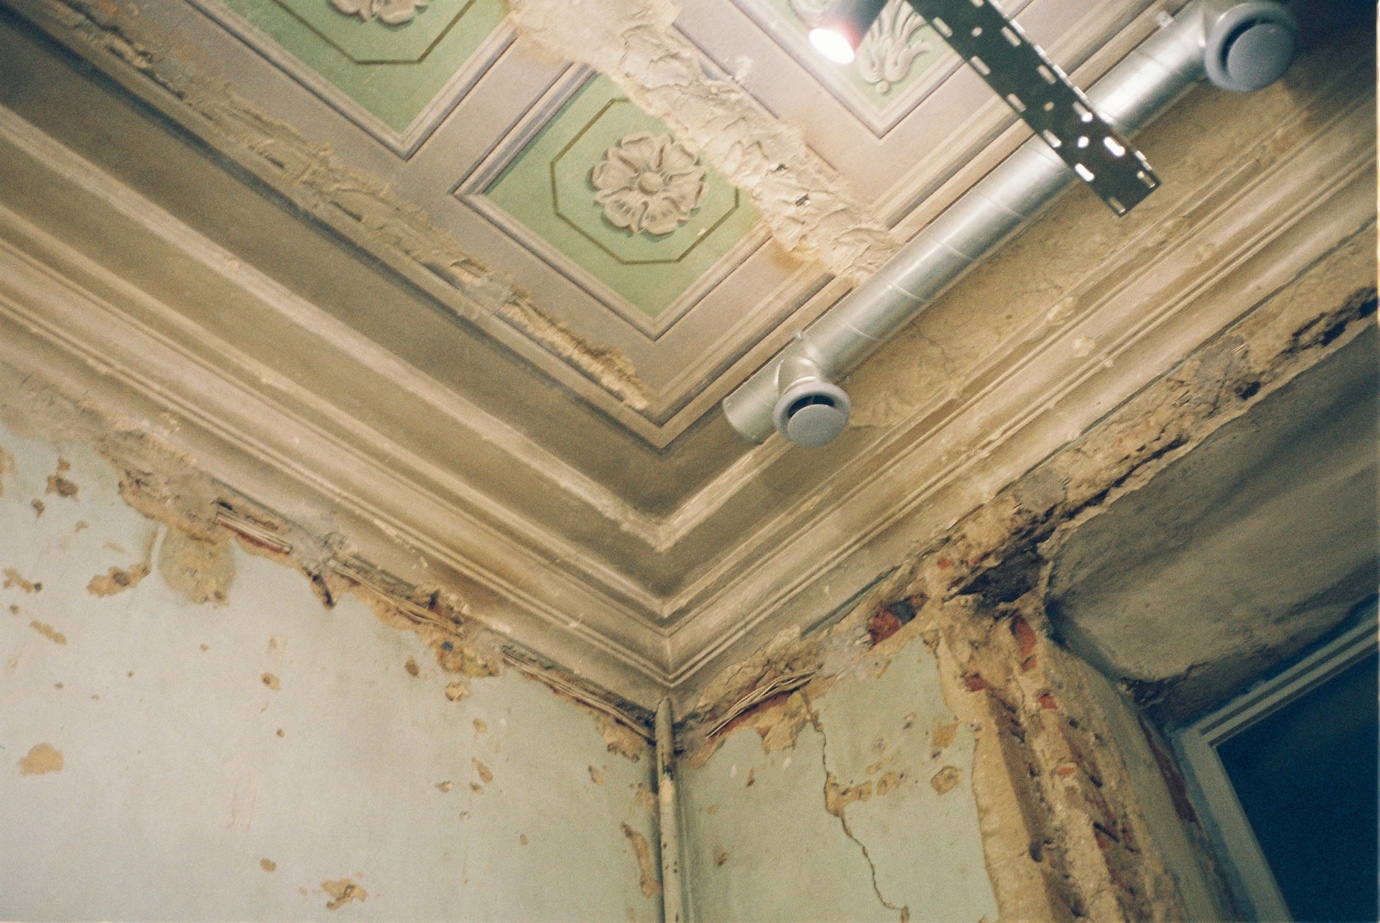 A ceiling with much damage and mold